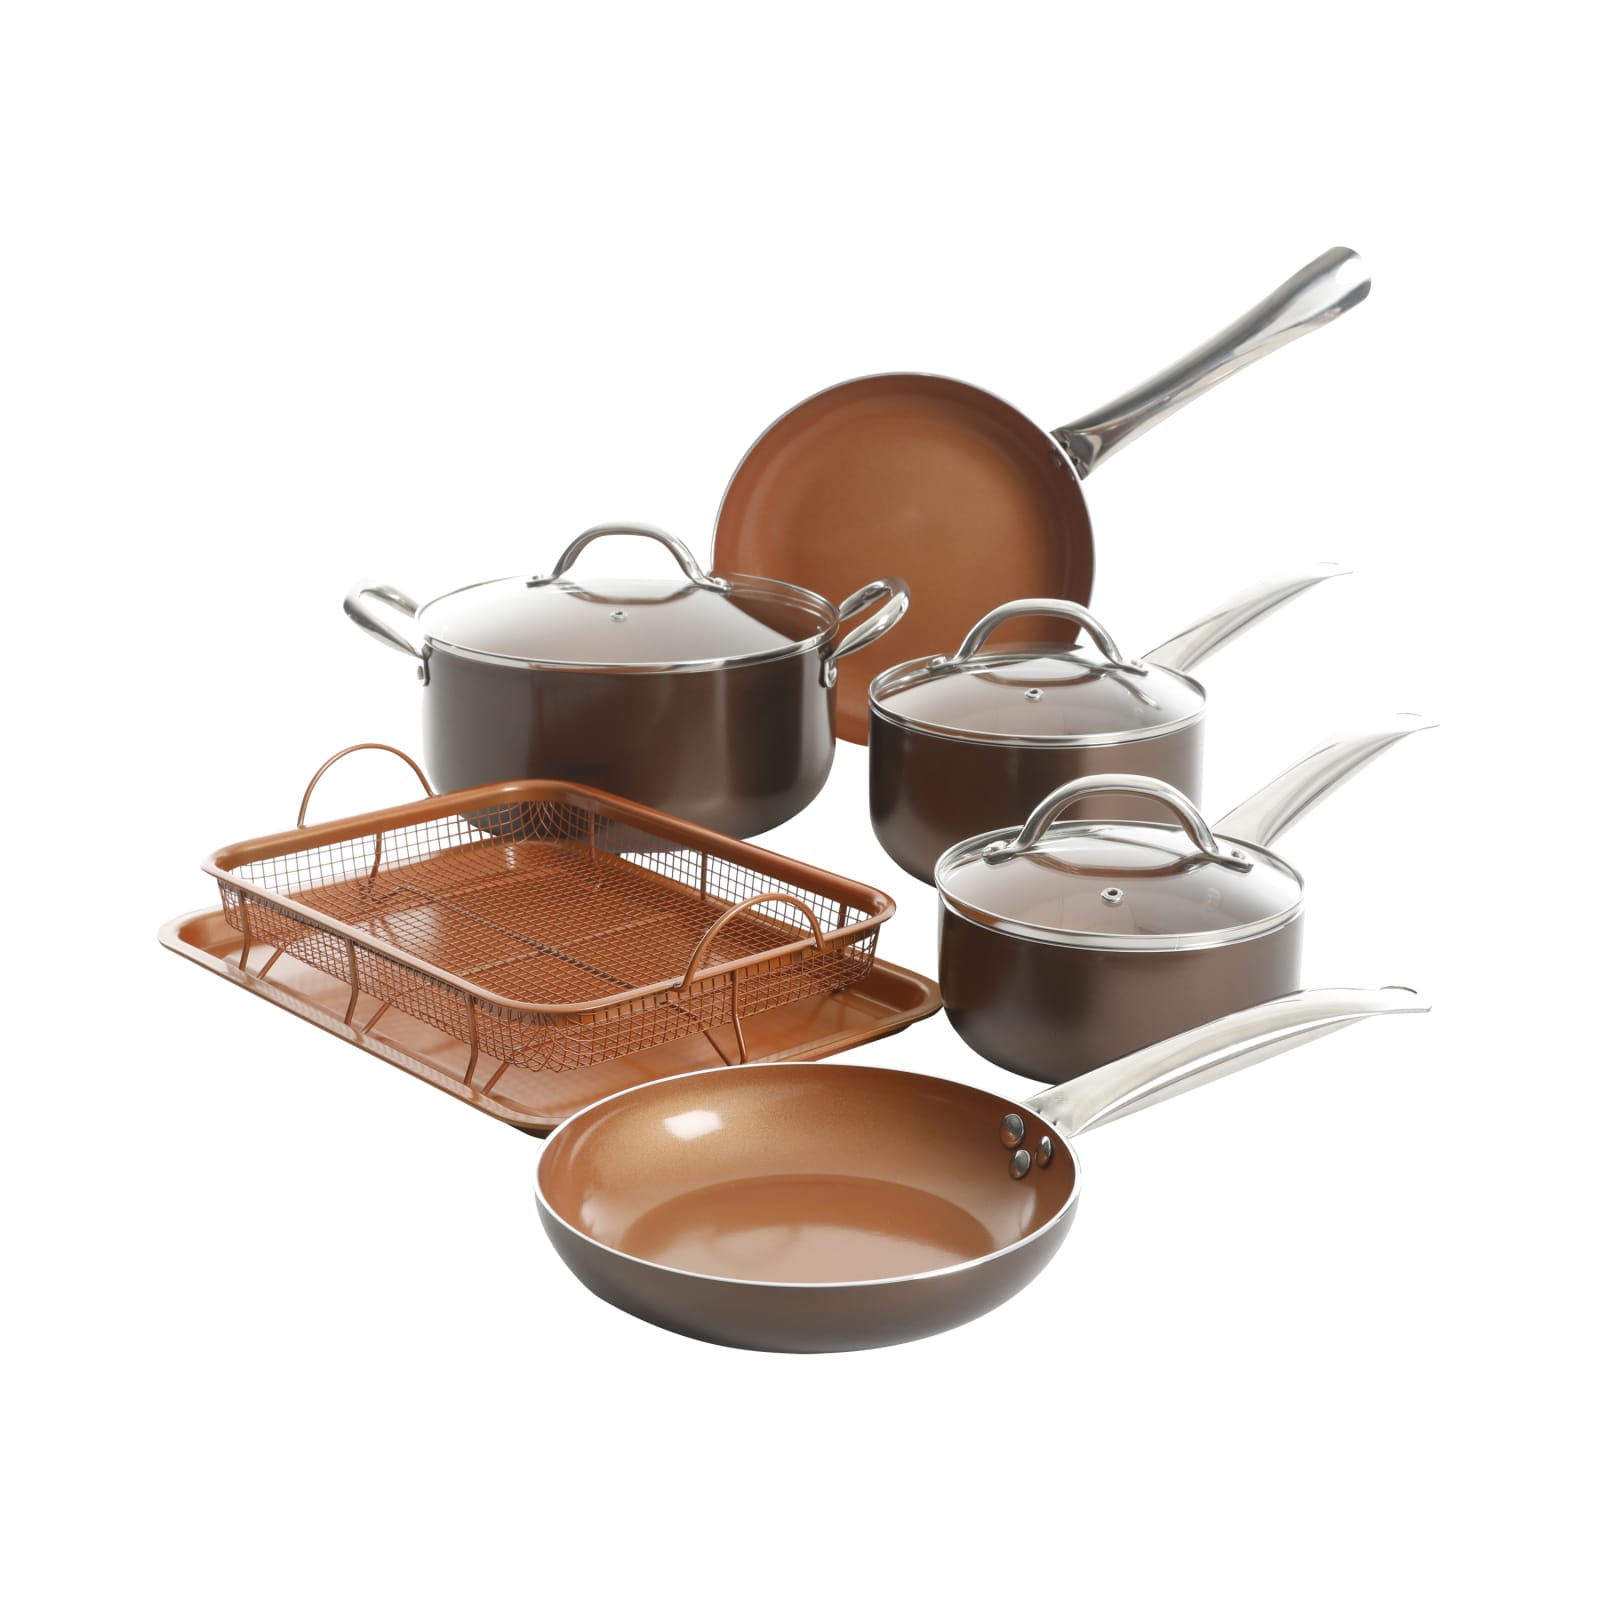 As Seen on TV Copper 10-Piece Cookware Set, Red